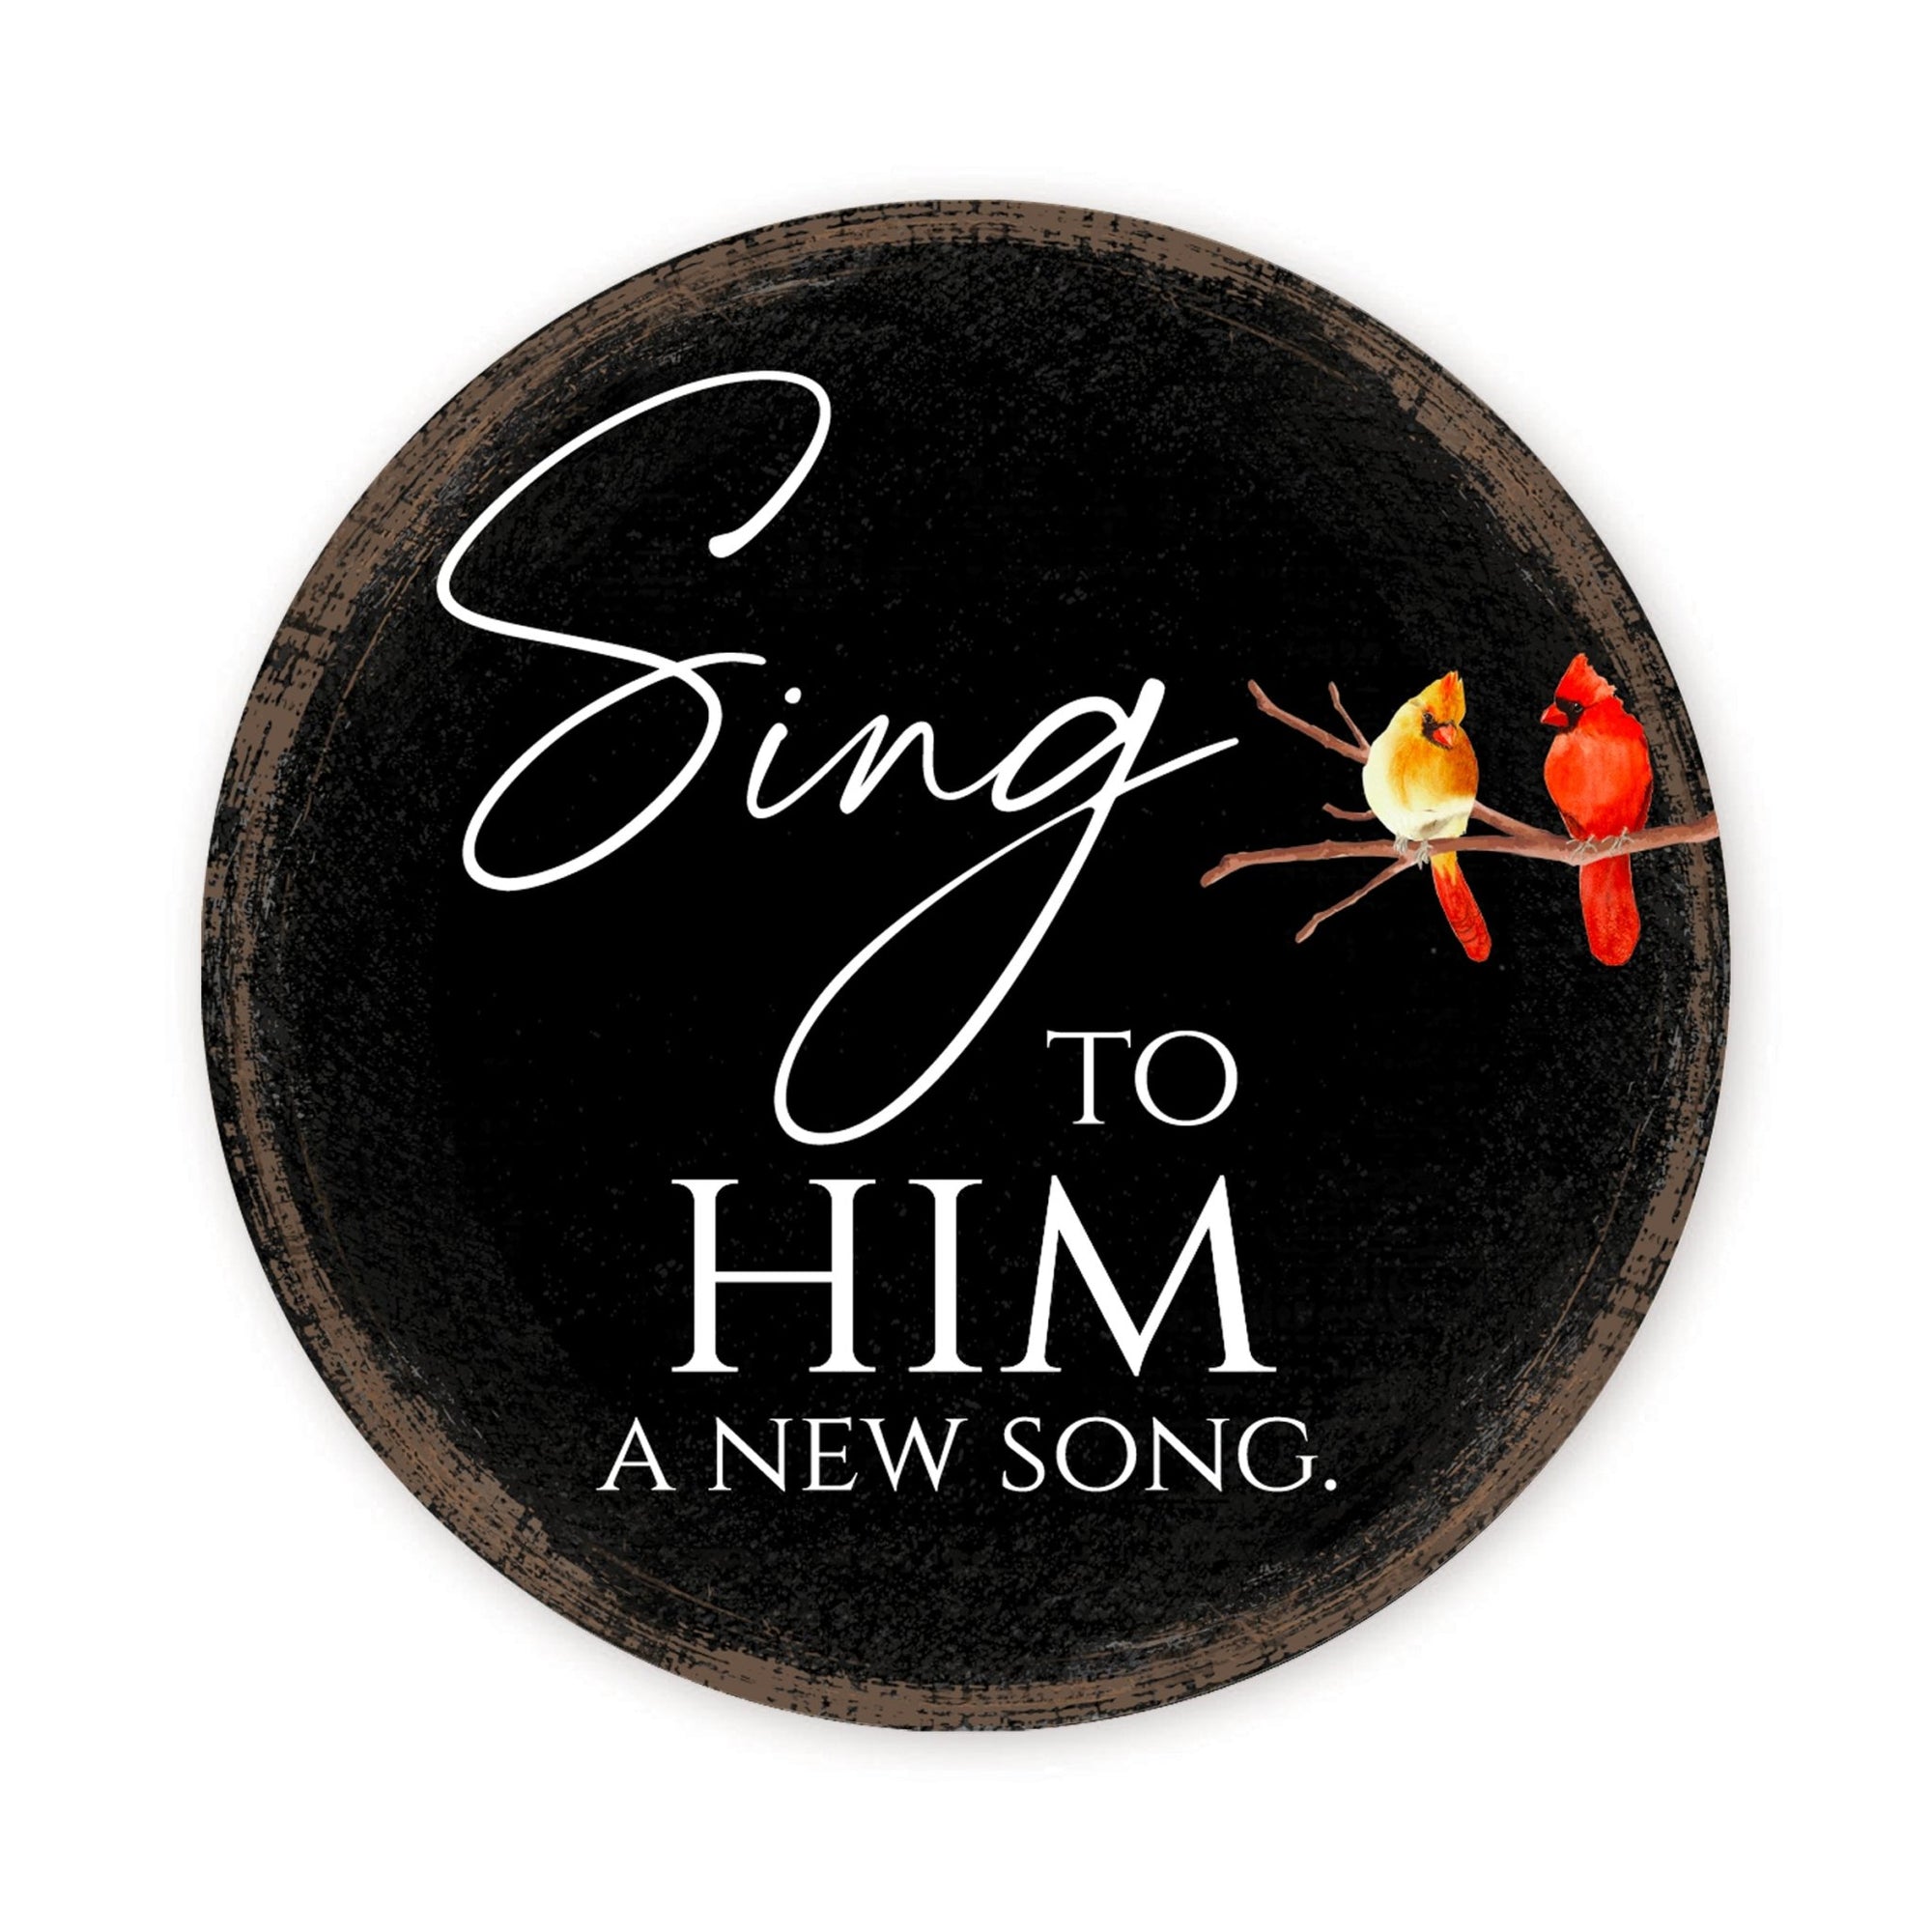 Vintage-Inspired Cardinal Wooden Magnet Printed With Everyday Inspirational Verses Gift Ideas - Sing To Him - LifeSong Milestones